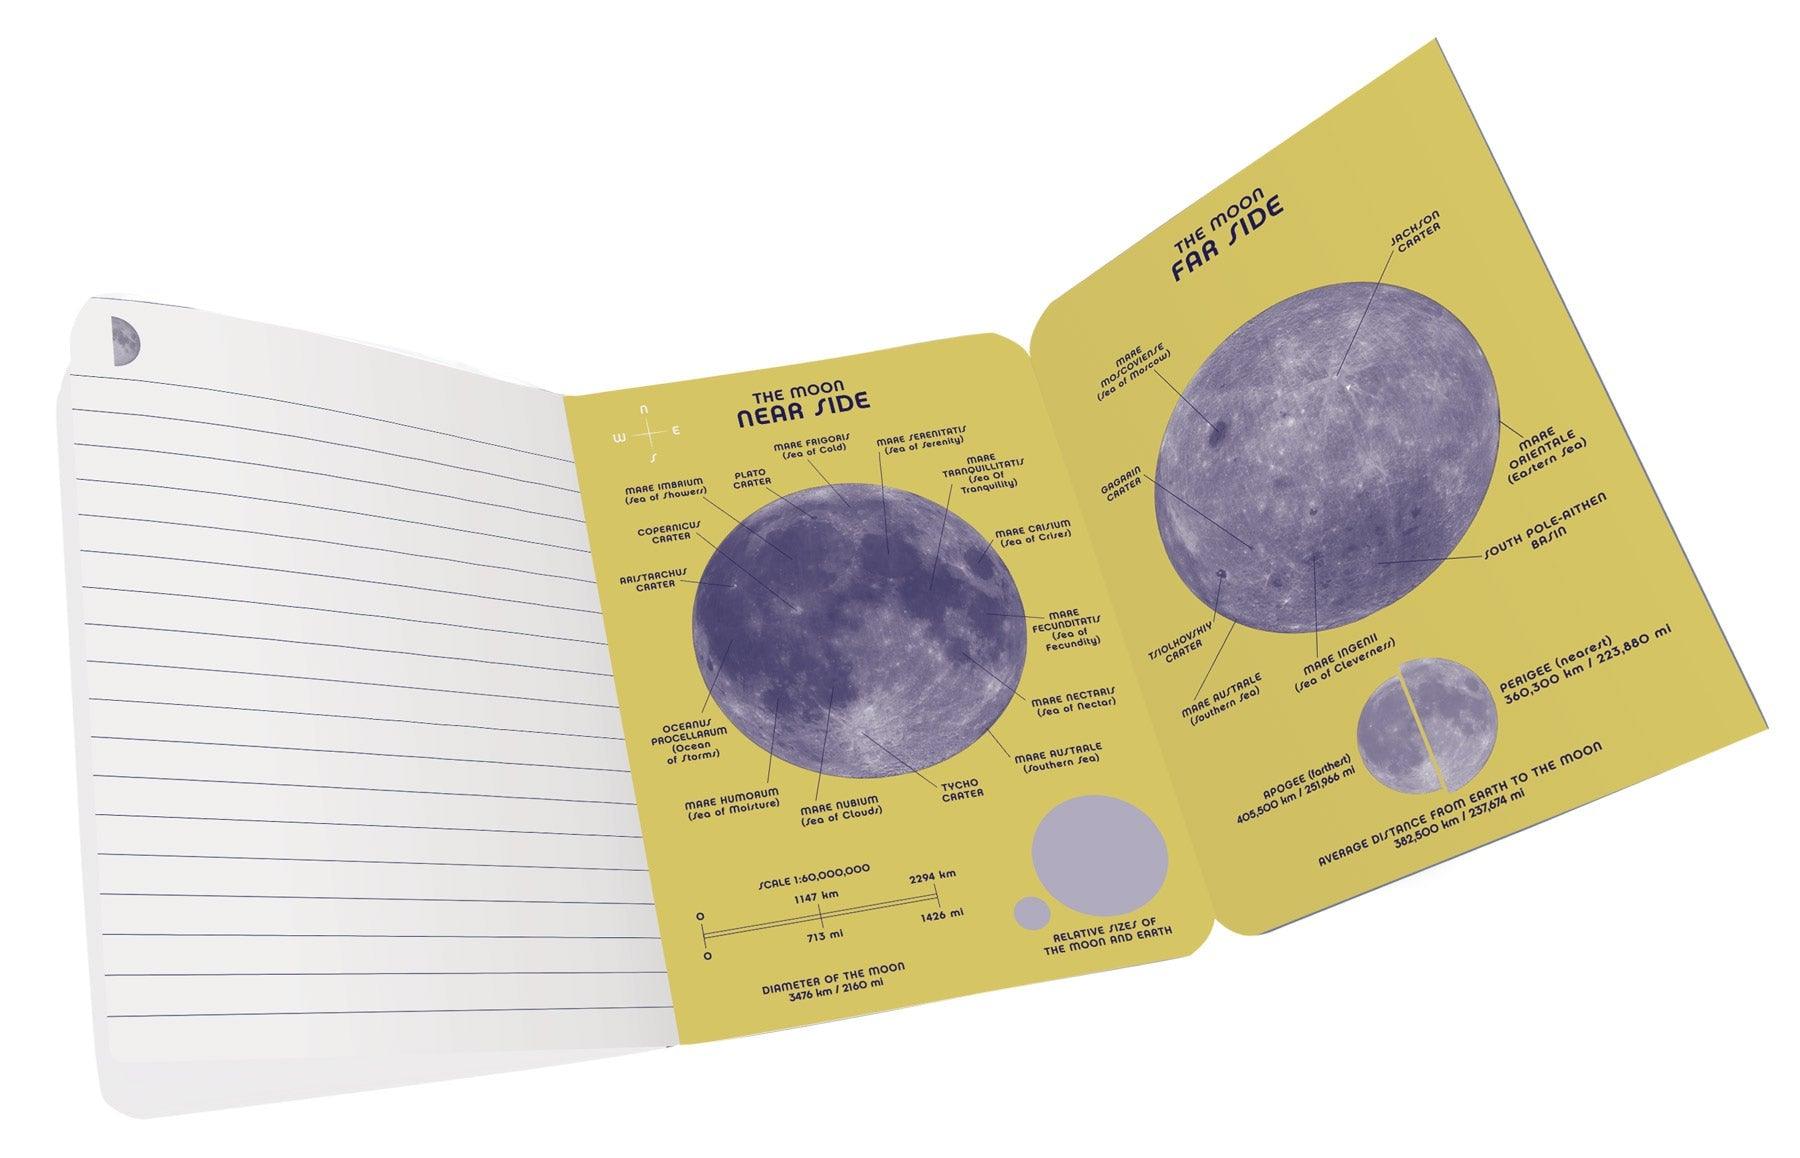 Product photo of Passport to the Moon Notebook, a novelty gift manufactured by The Unemployed Philosophers Guild.